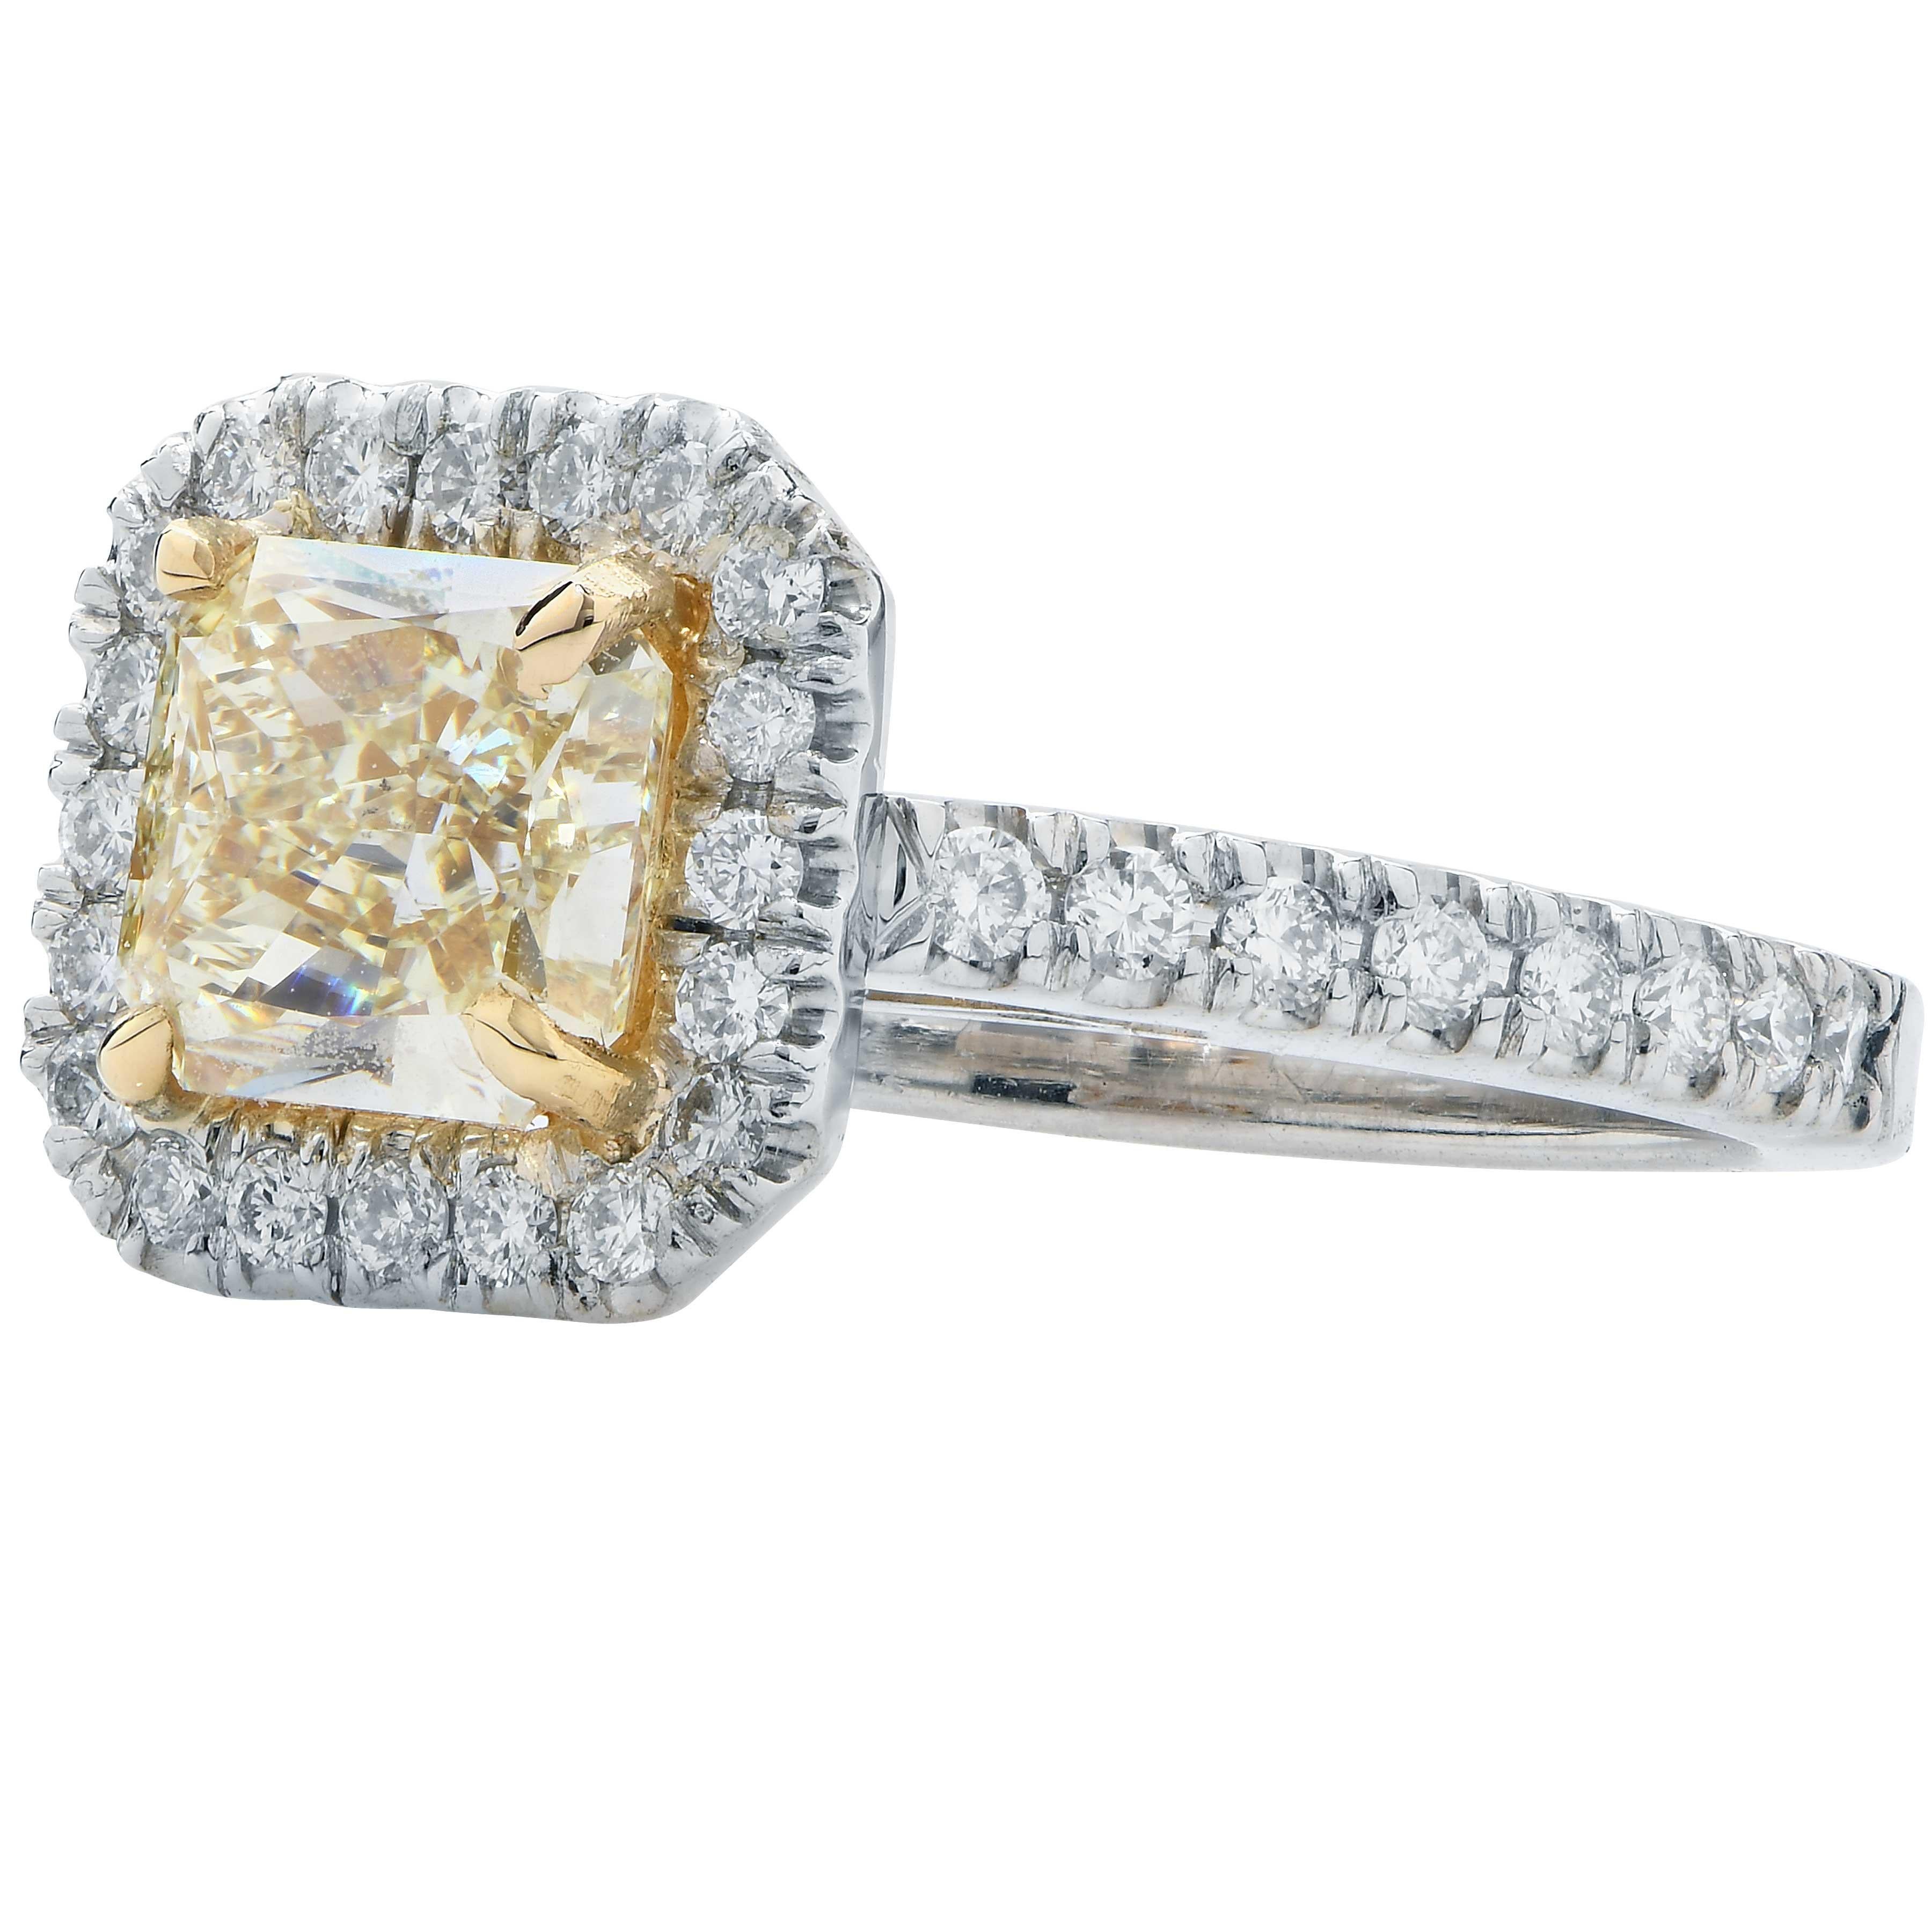 1.38 Carat Radiant Cut Yellow Diamond in Platinum Engagement Ring adorned with 36 round brilliant cut diamonds with an estimated total weight of .54 carats.
Ring Size: 5 1/2
Metal Type: Platinum 
Metal Weight: 7.2 Grams